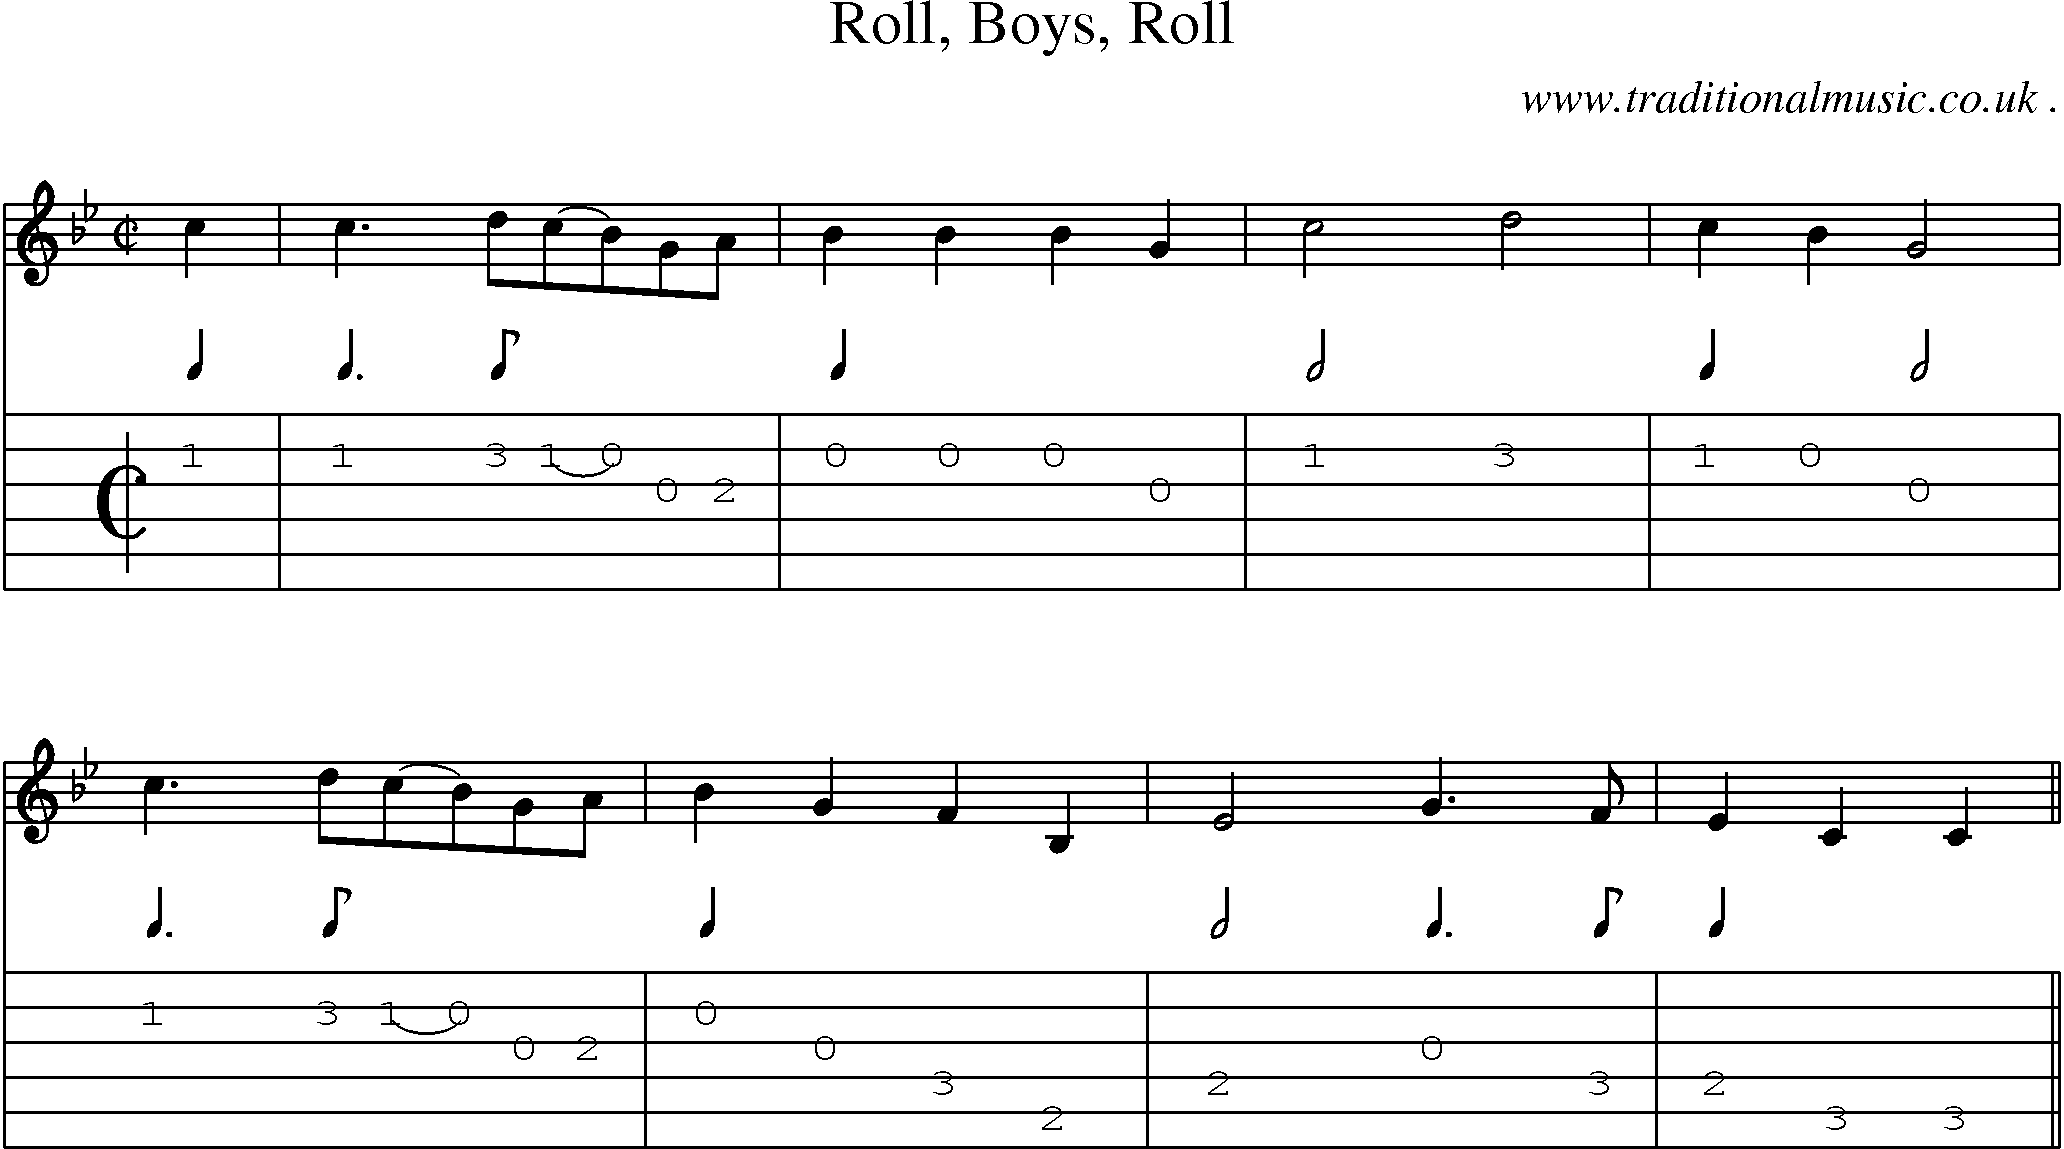 Sheet-Music and Guitar Tabs for Roll Boys Roll